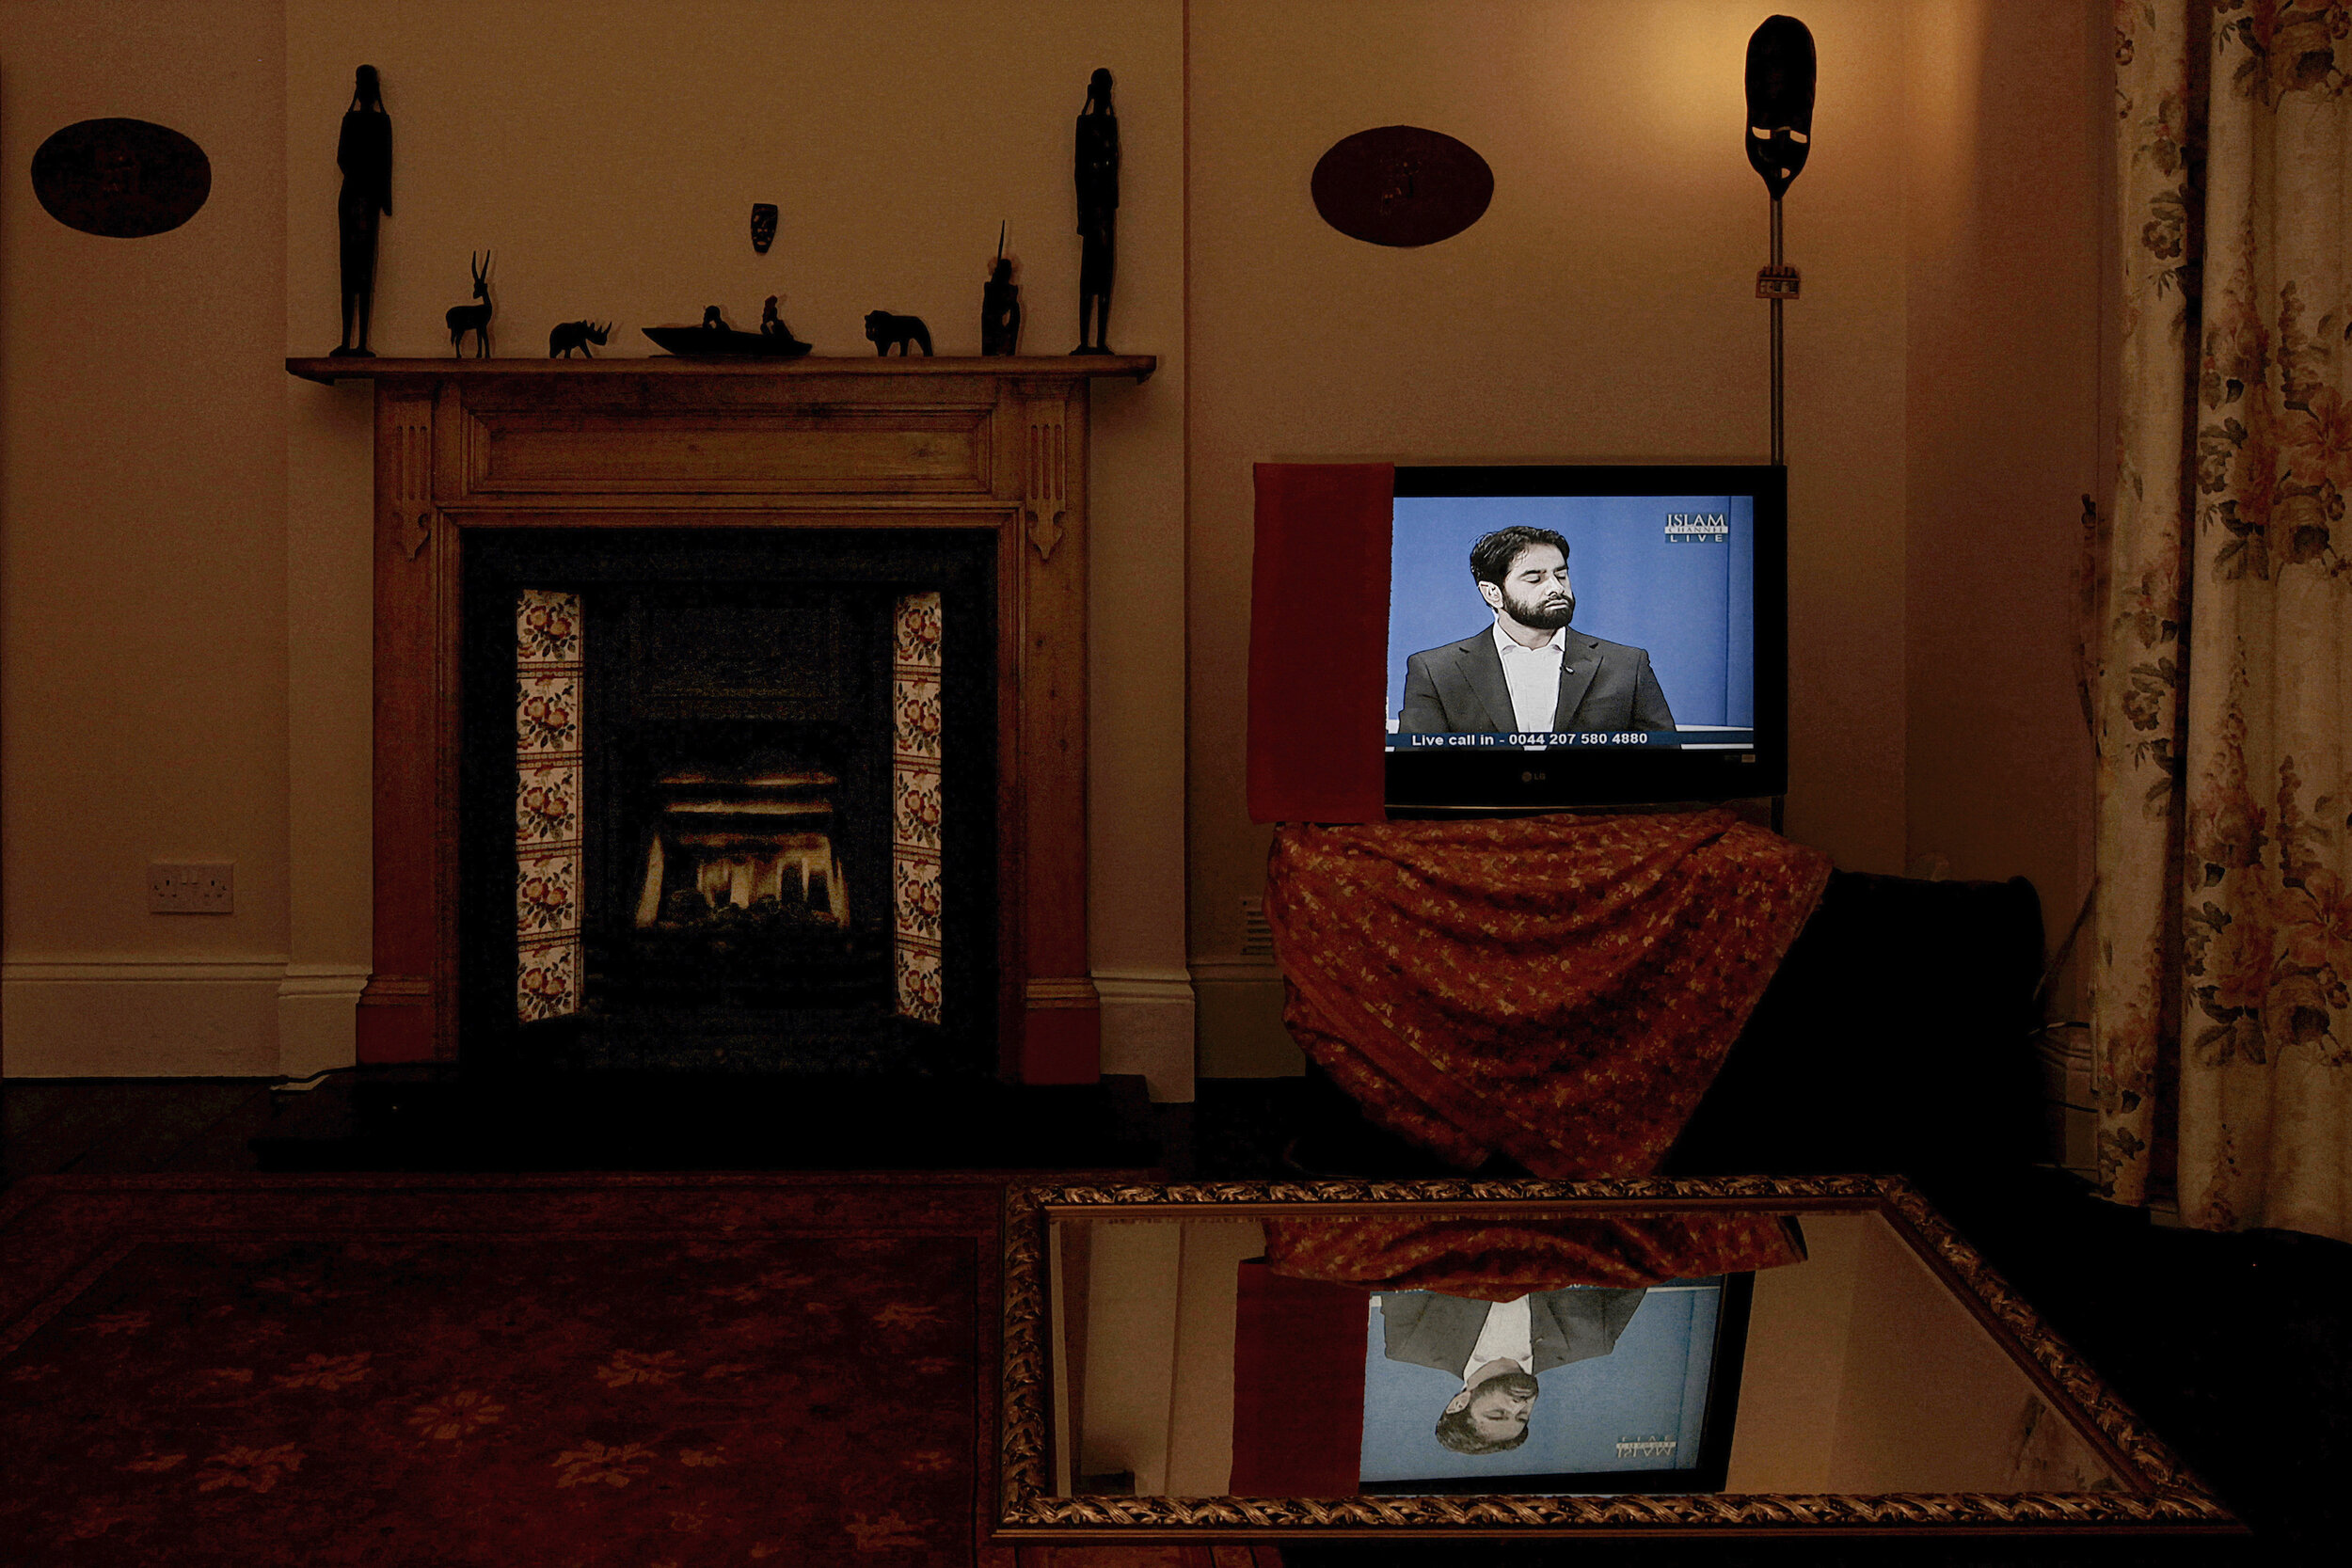   UK. London. 2012. Azad Ali presents his show ‘Your Views on the News’ on Islam Channel. In 2009, Ali was suspended from his job as a Treasury civil servant after a newspaper reported that Ali, on his blog, had advocated the killing of British soldi